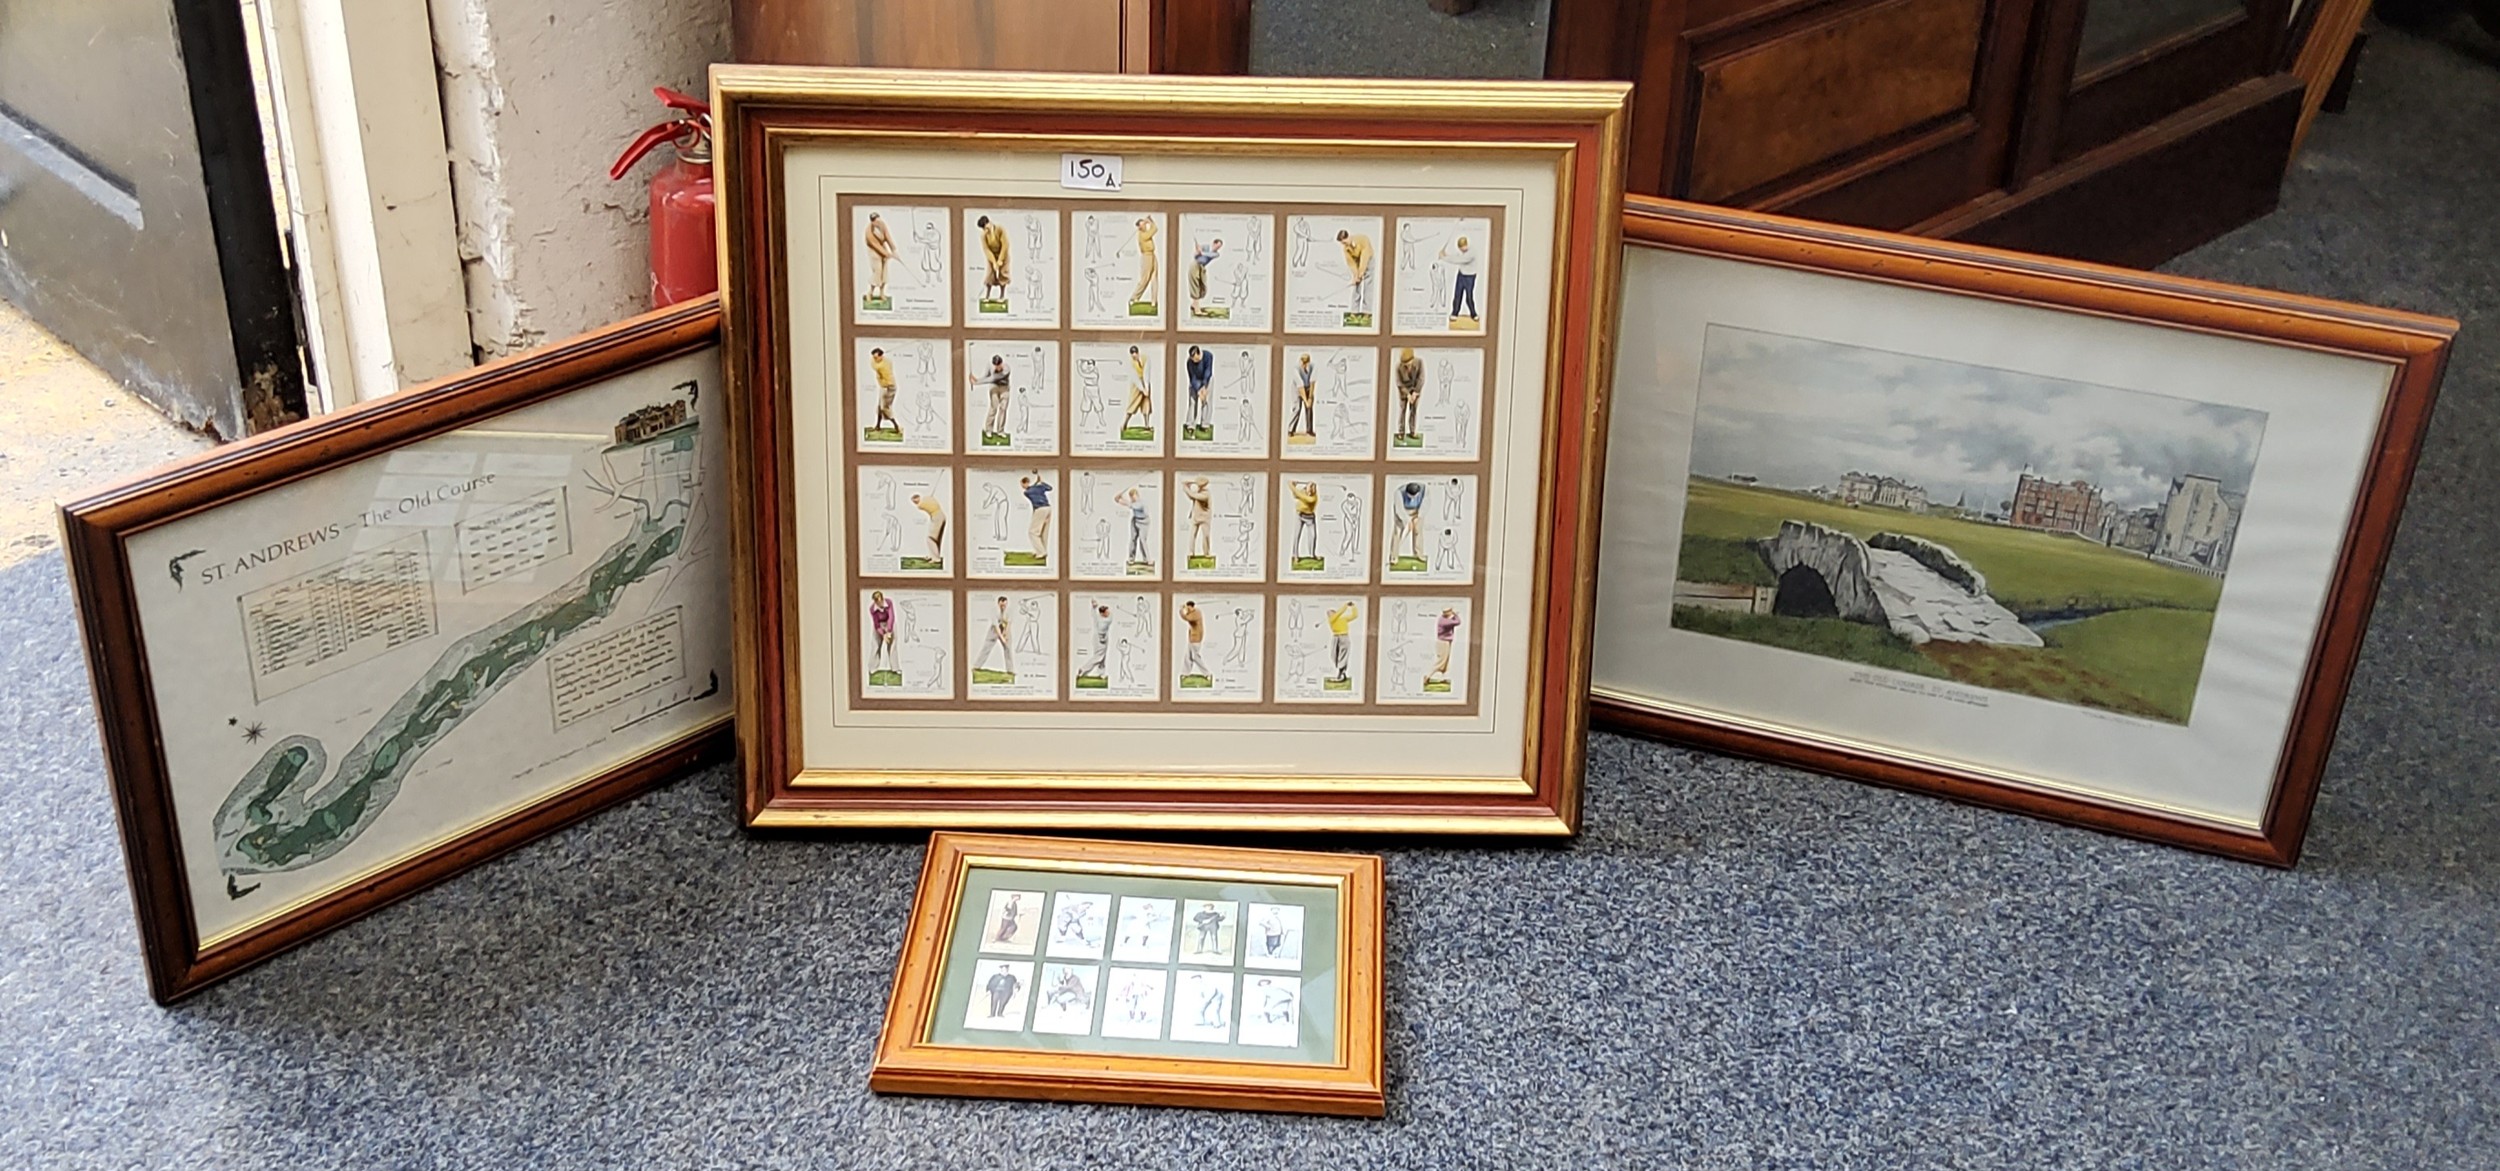 Golfing interest - a framed set of Player's Cigarettes cards reprints ,displaying golf shots of